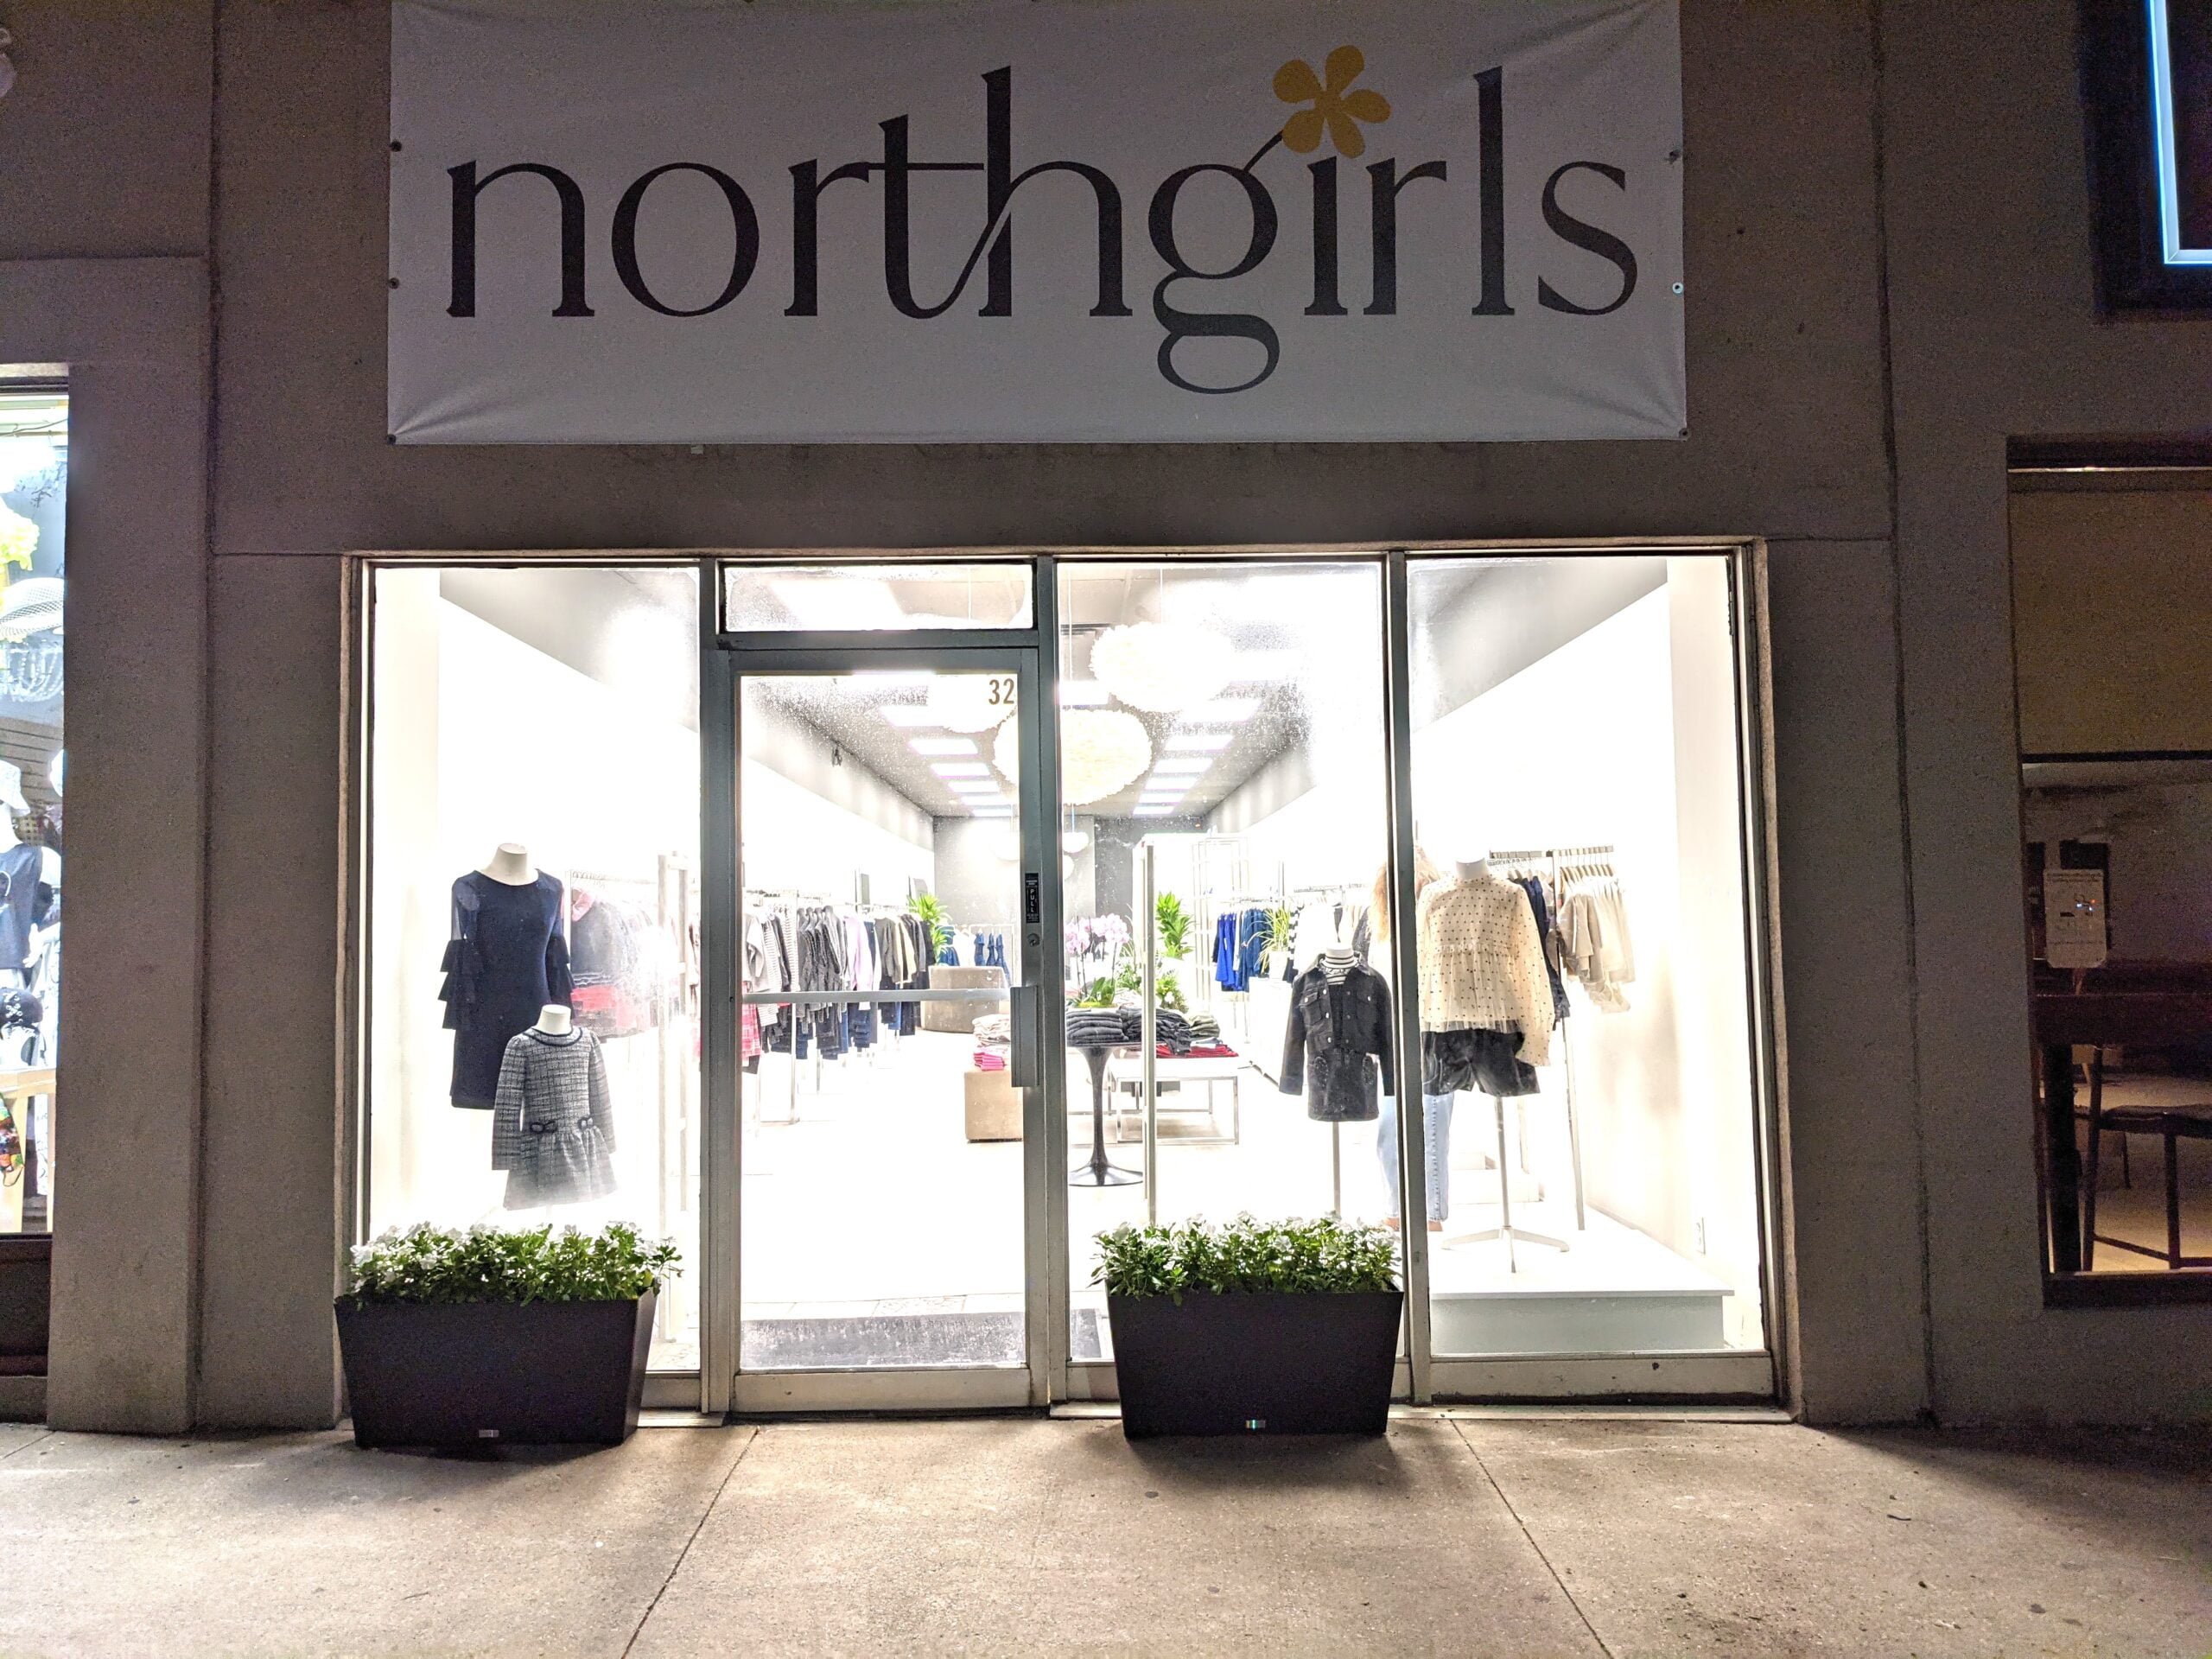 Popular North American clothing brand is opening its first Toronto store